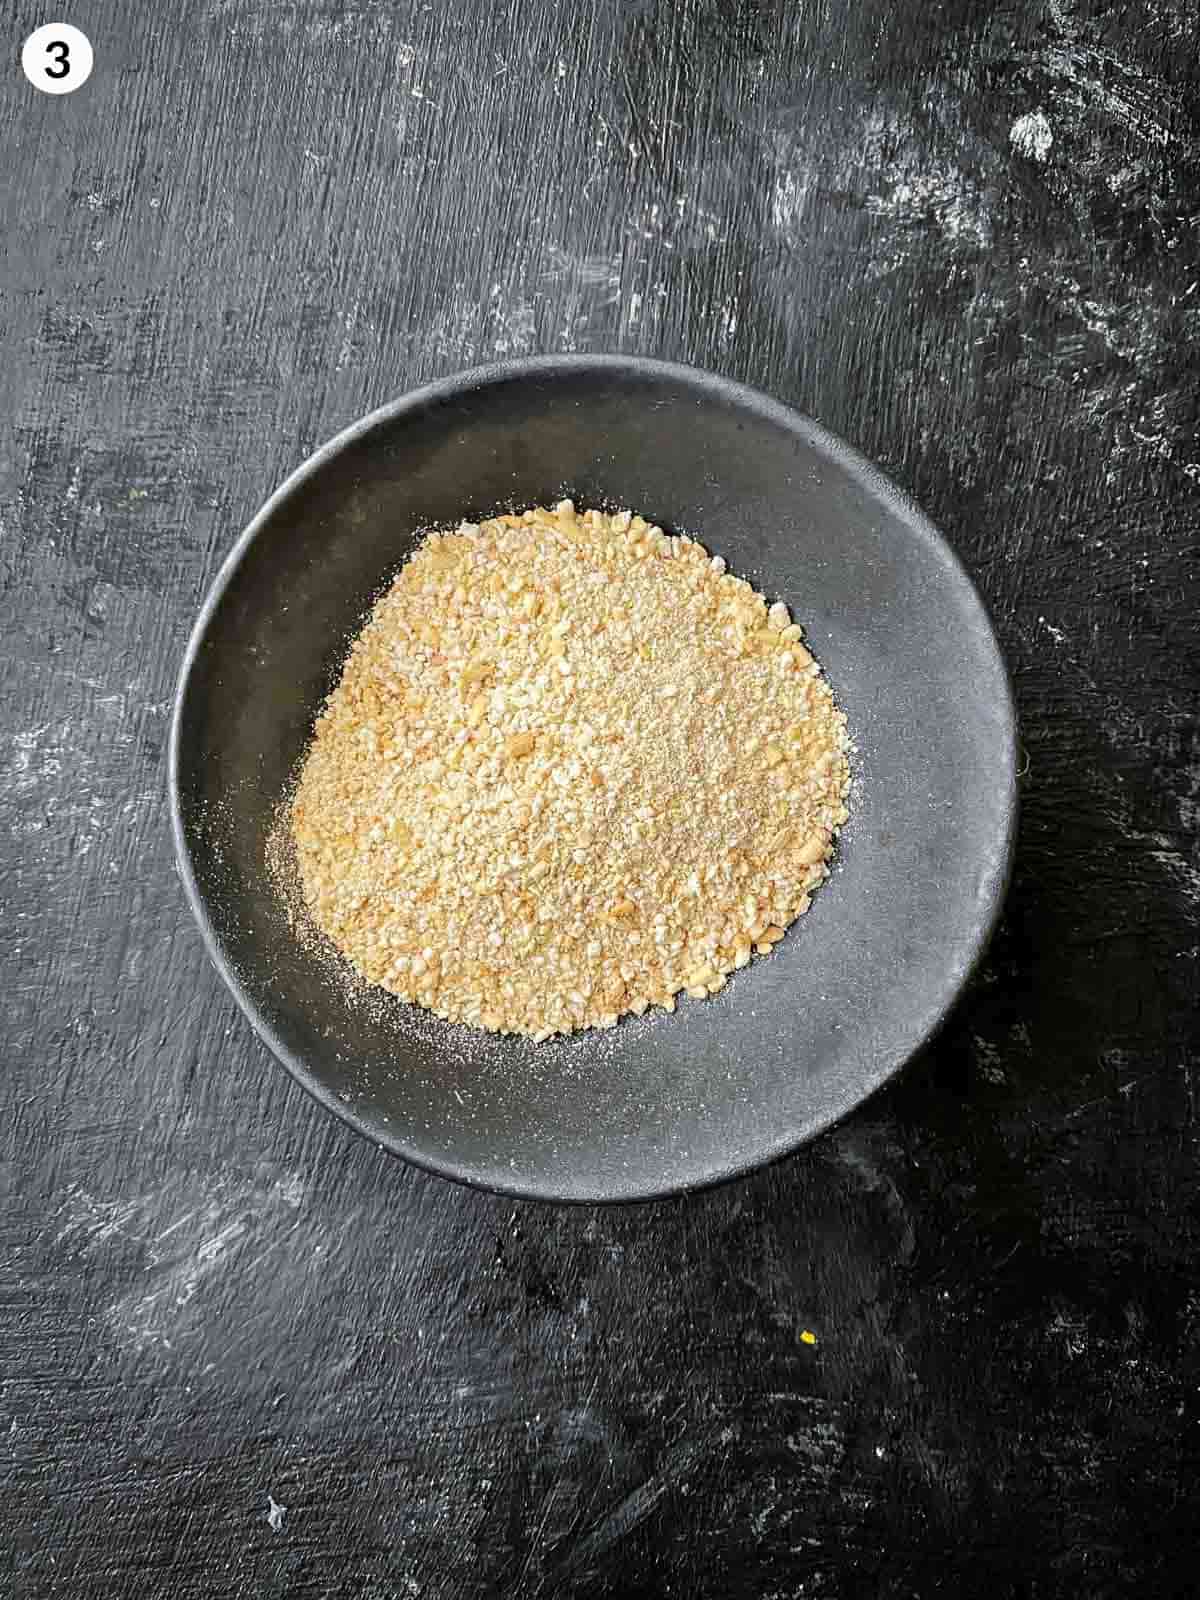 a small bowl of grounded rice powder